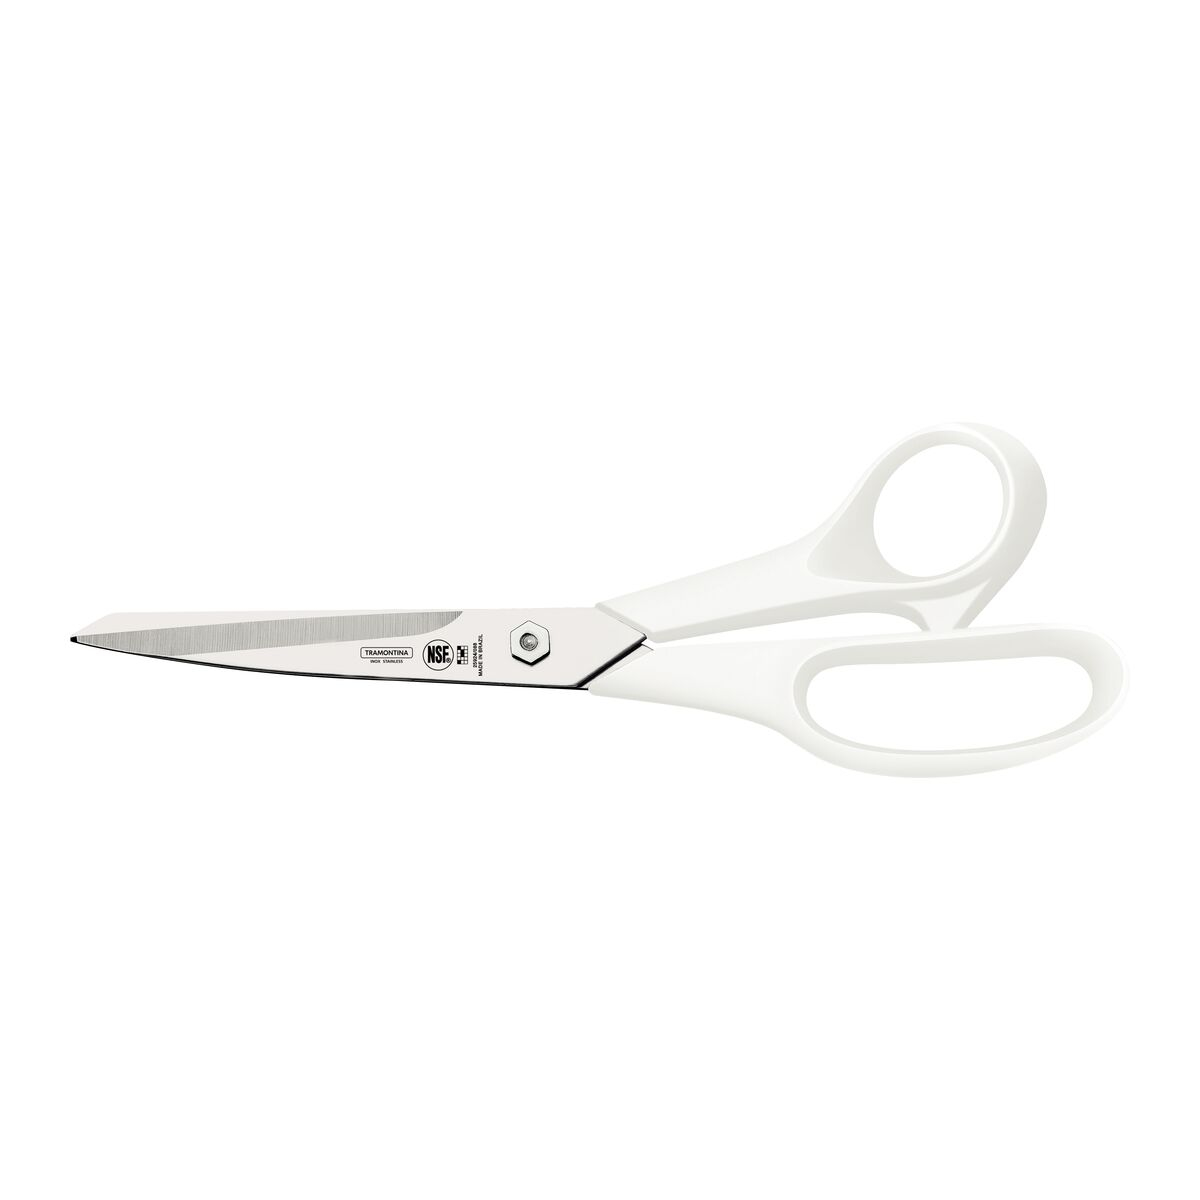 Tramontina Professional Collapsible Scissors with Stainless-Steel Micro-Serrated Edge Blade and White Polypropylene Handle 8"